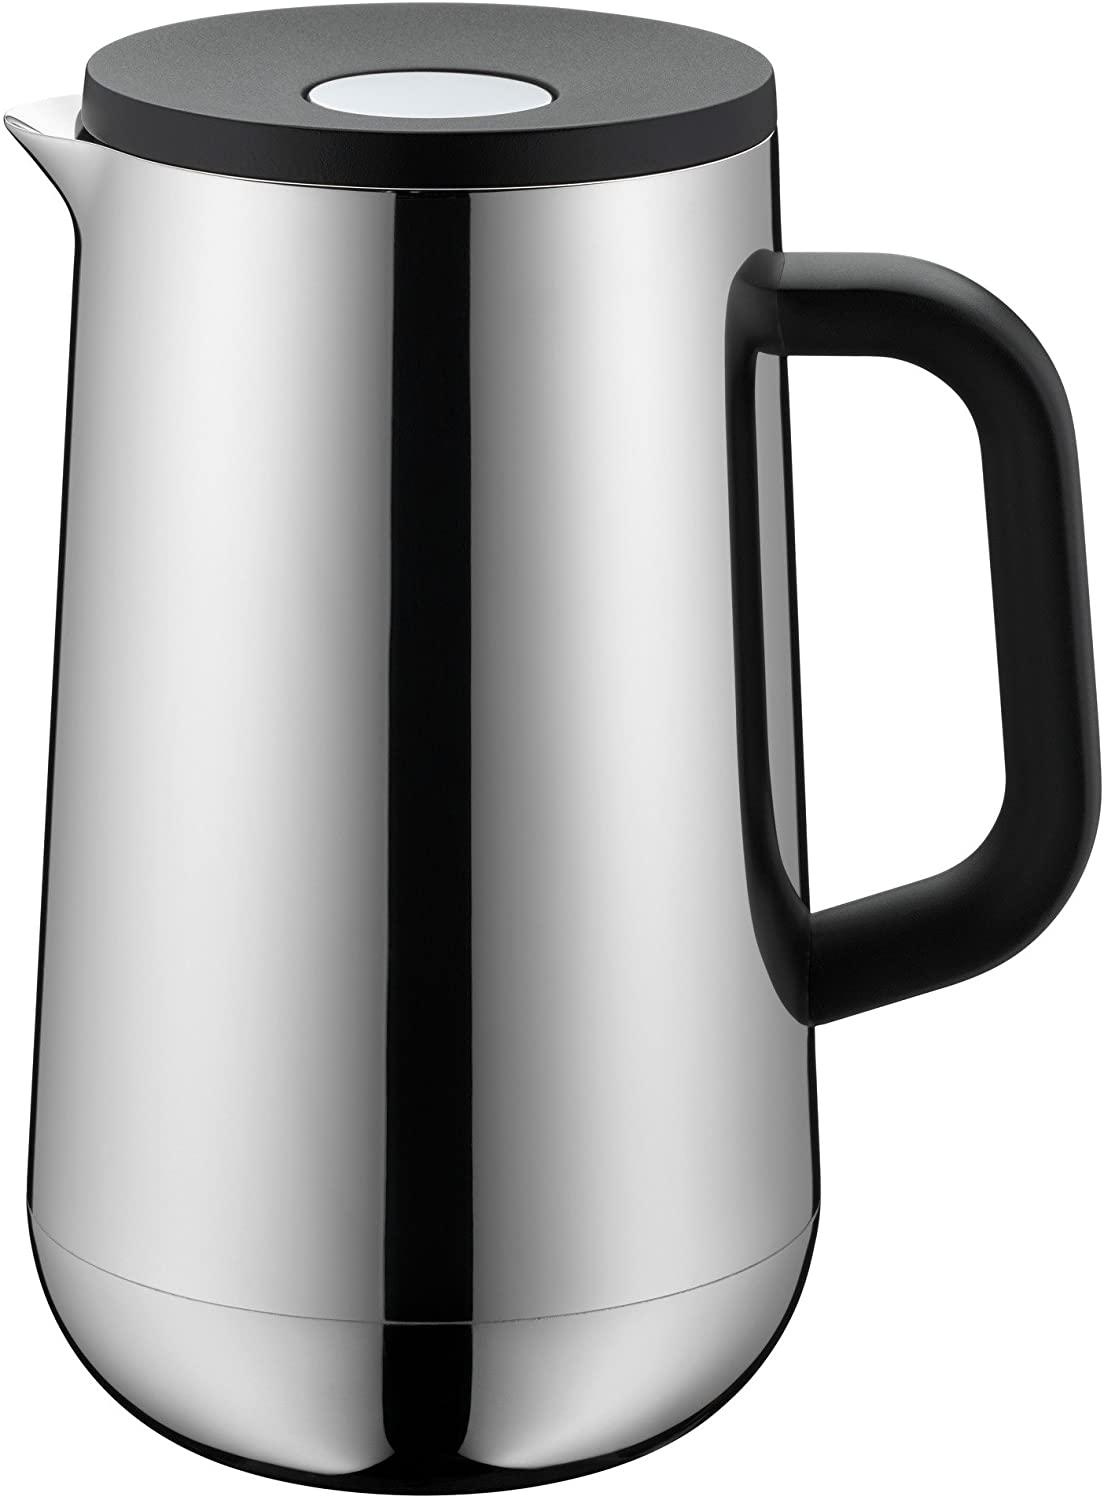 WMF Impulse Thermos Flask Stainless Steel 1 Litre Insulated Jug for Tea or Coffee, Pressure Closure, Keeps Drinks Cold and Warm for 24 Hours